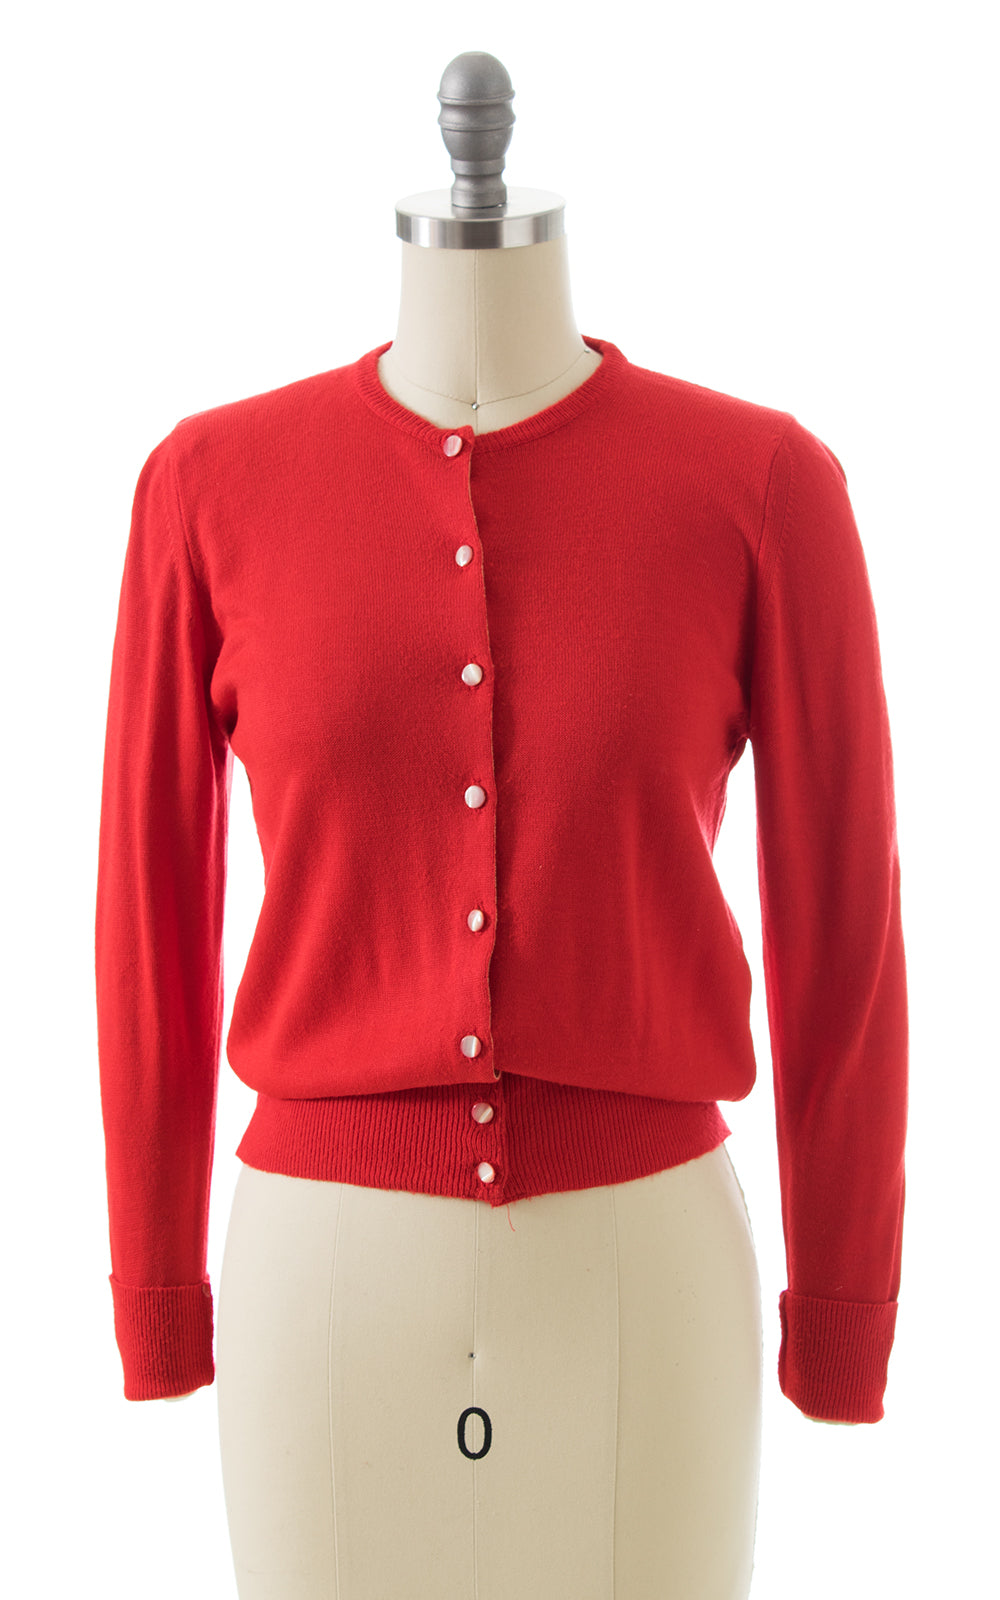 1950s Red Knit Cardigan